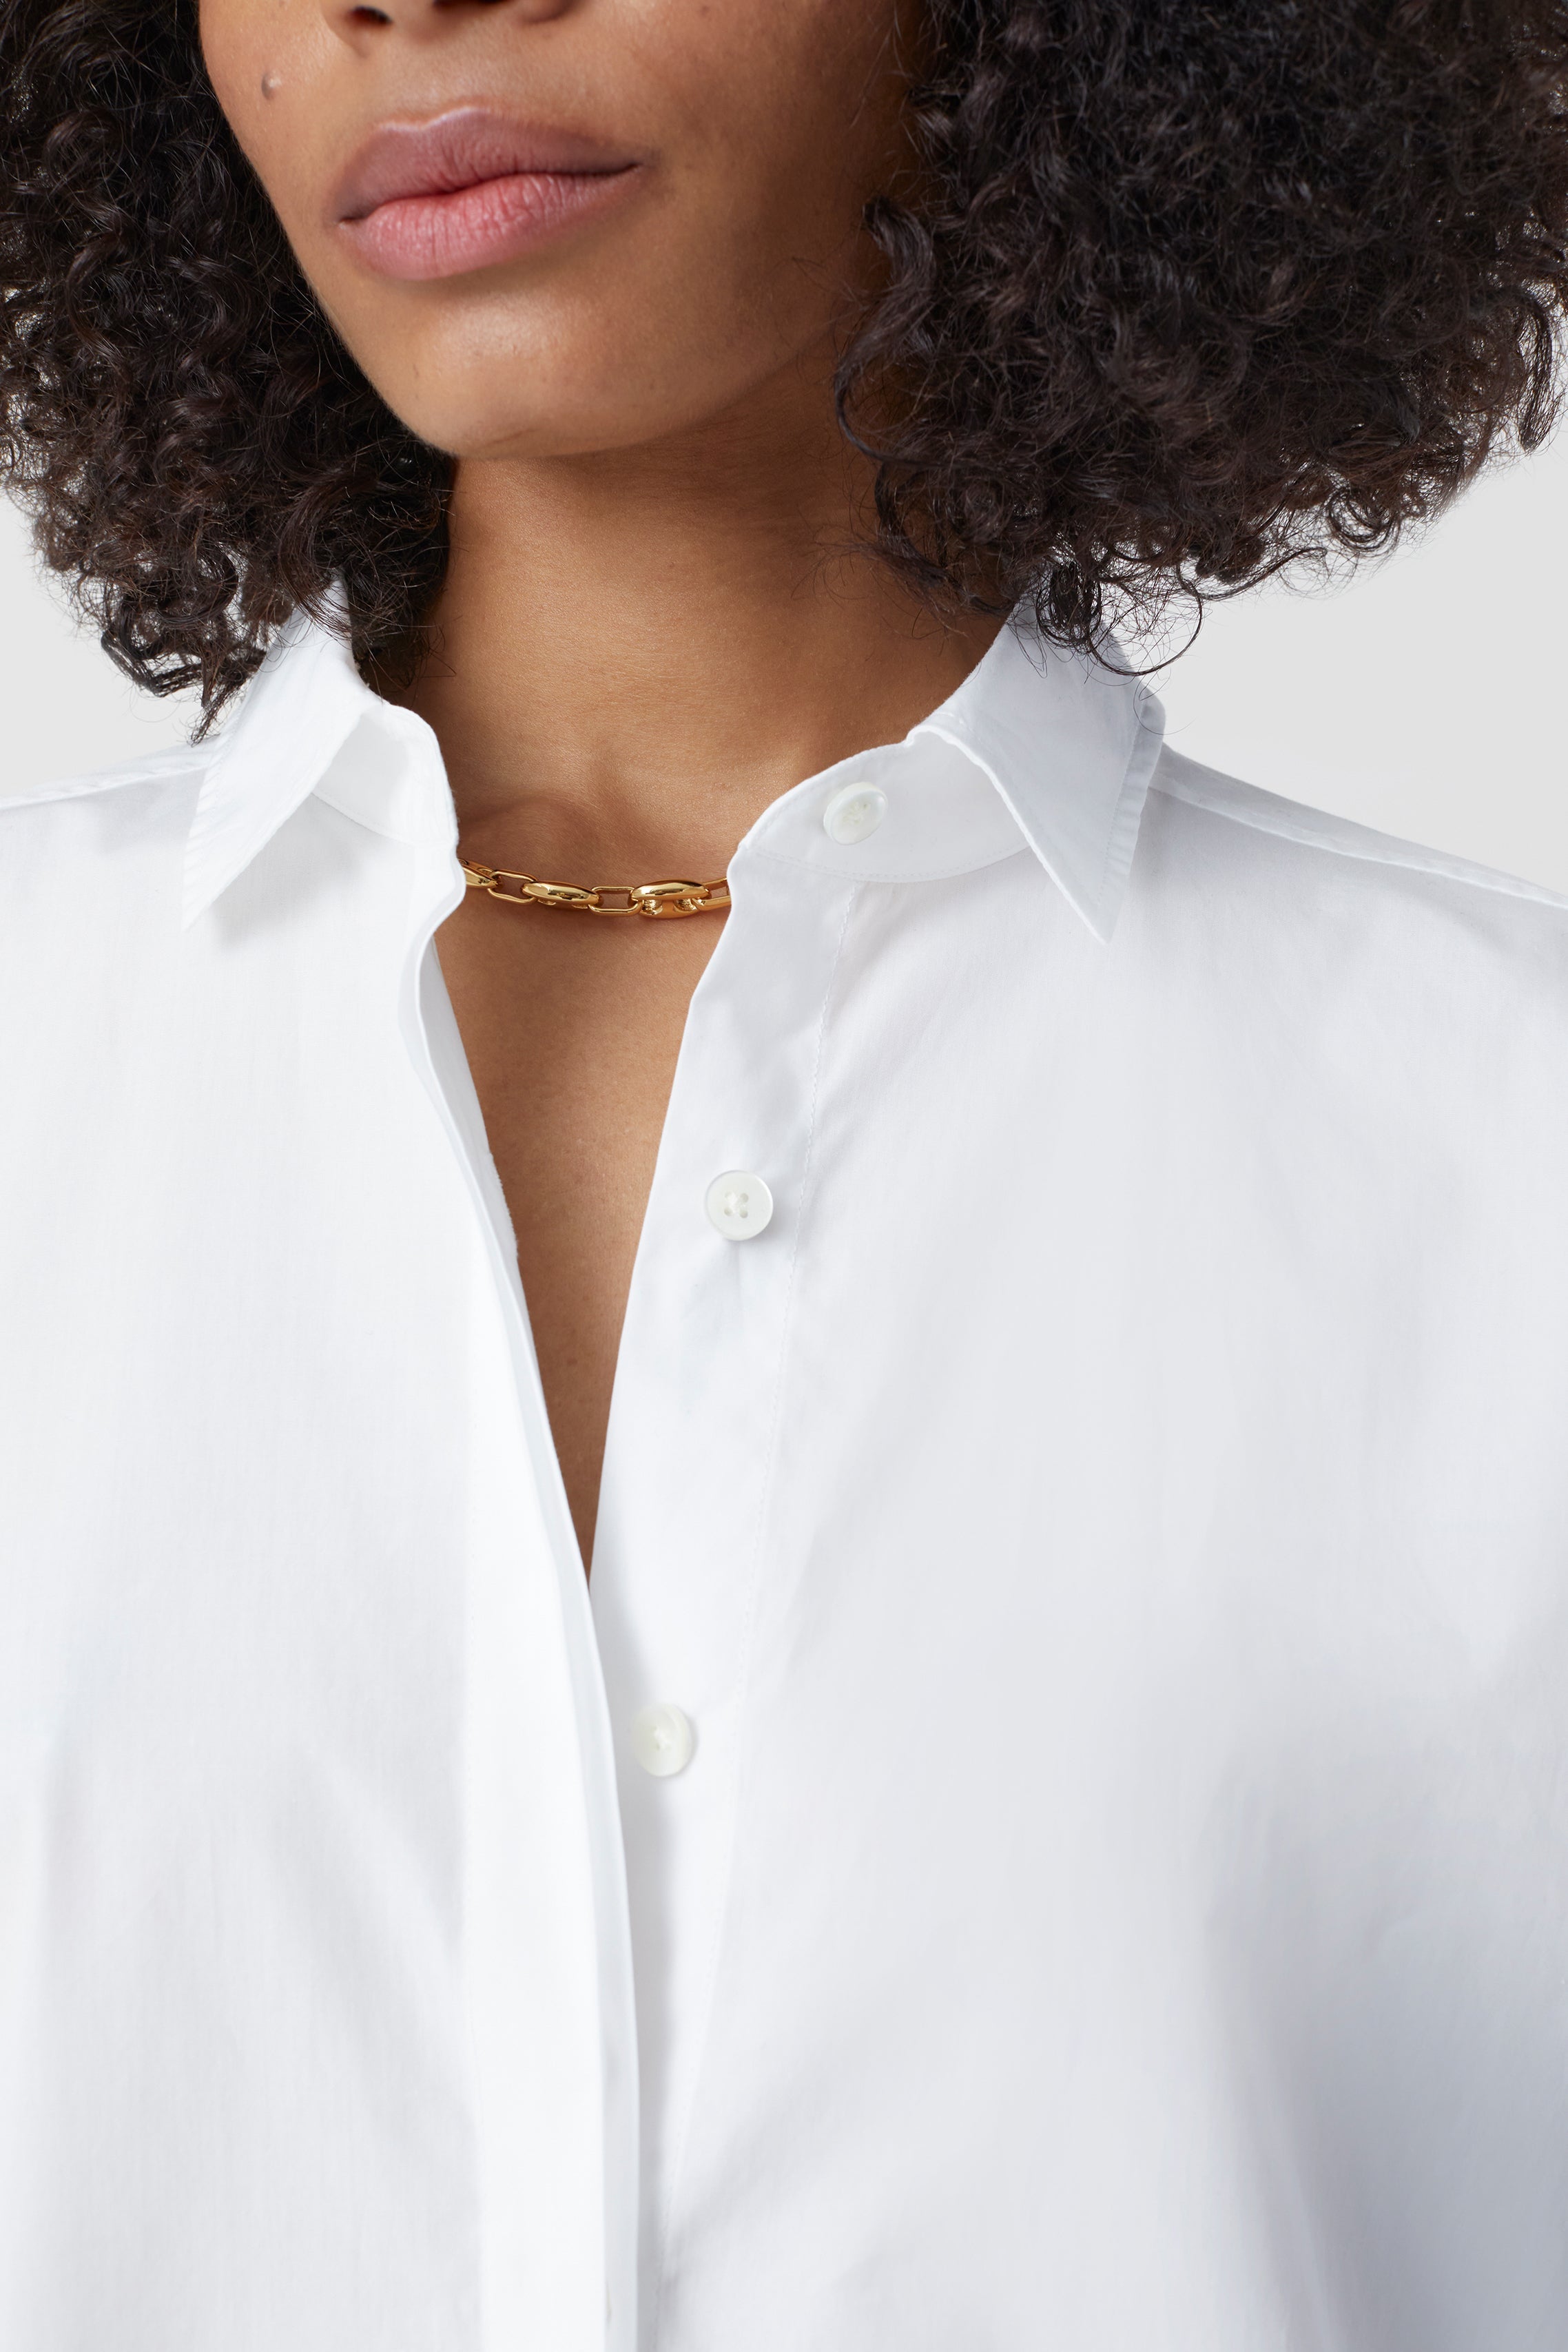 CLOSED-OUTLET-SALE-STYLE-NAME-PLACKET-DETAIL-SHIRT-Blusen-ARCHIVE-COLLECTION-2.jpg